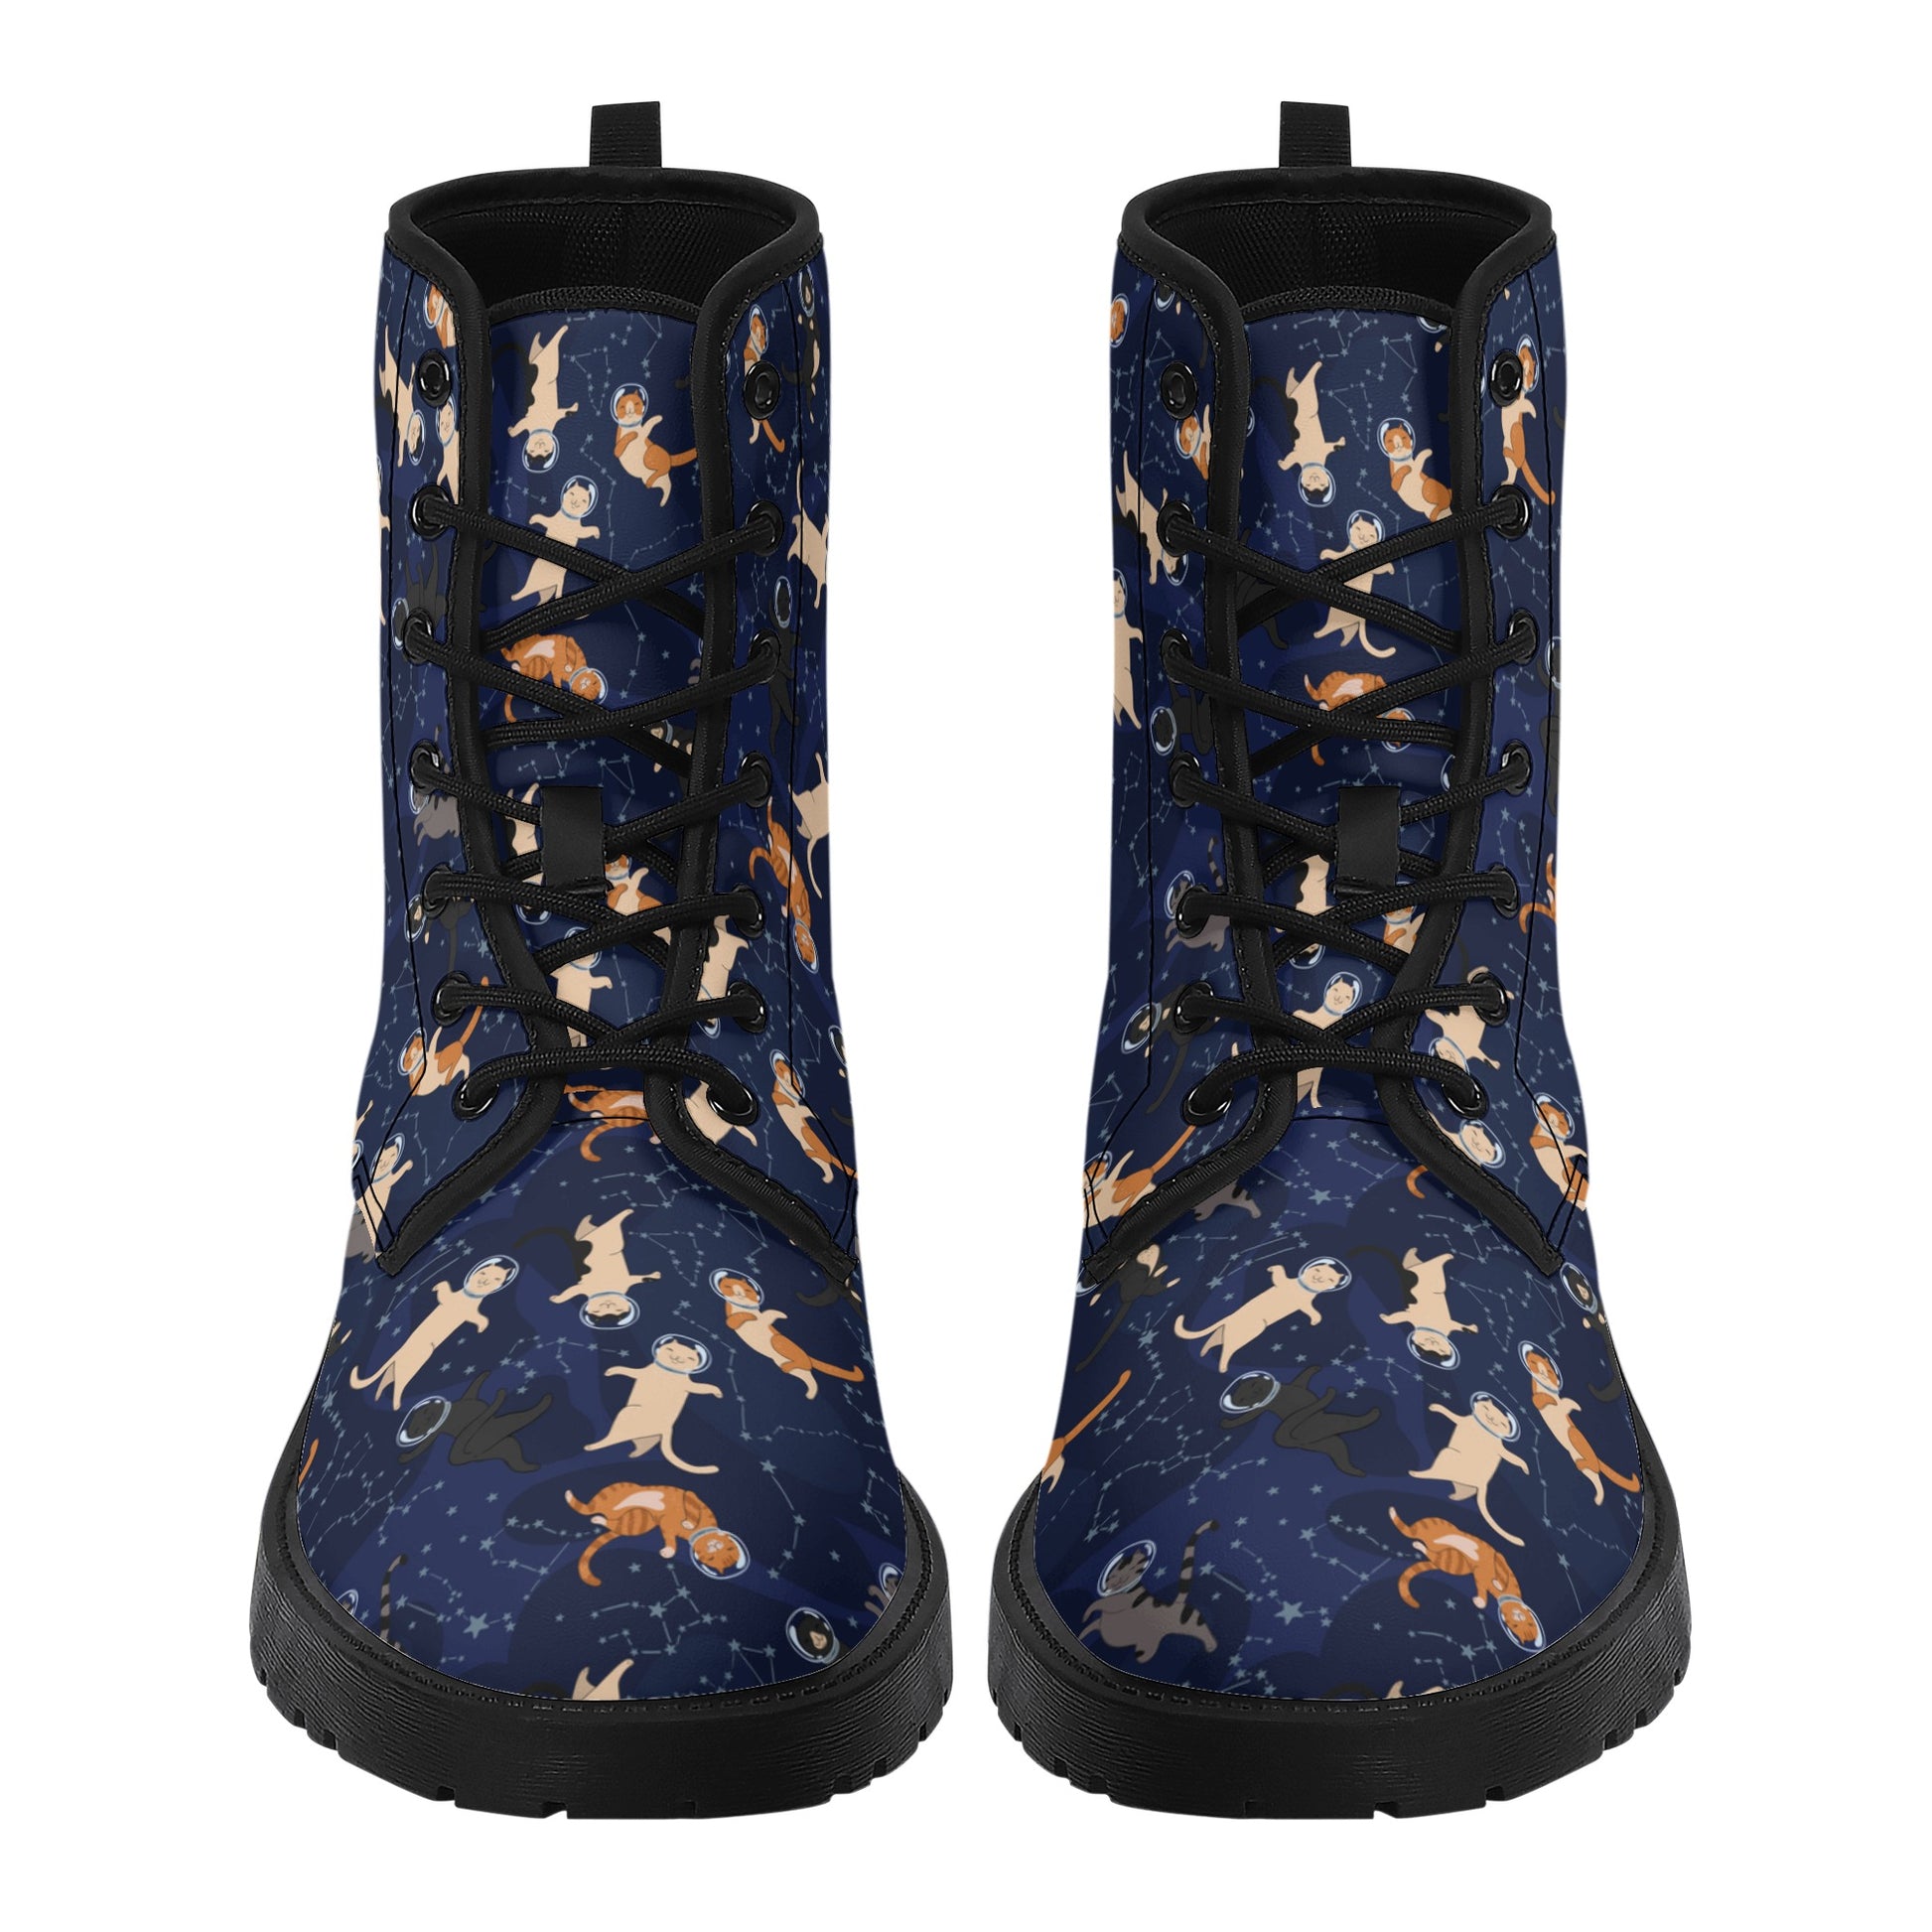 Galaxy Cats in Space Women Leather Boots, Constellation Vegan Lace Up Shoes Hiking Festival Black Ankle Combat Work Waterproof Custom Ladies Starcove Fashion